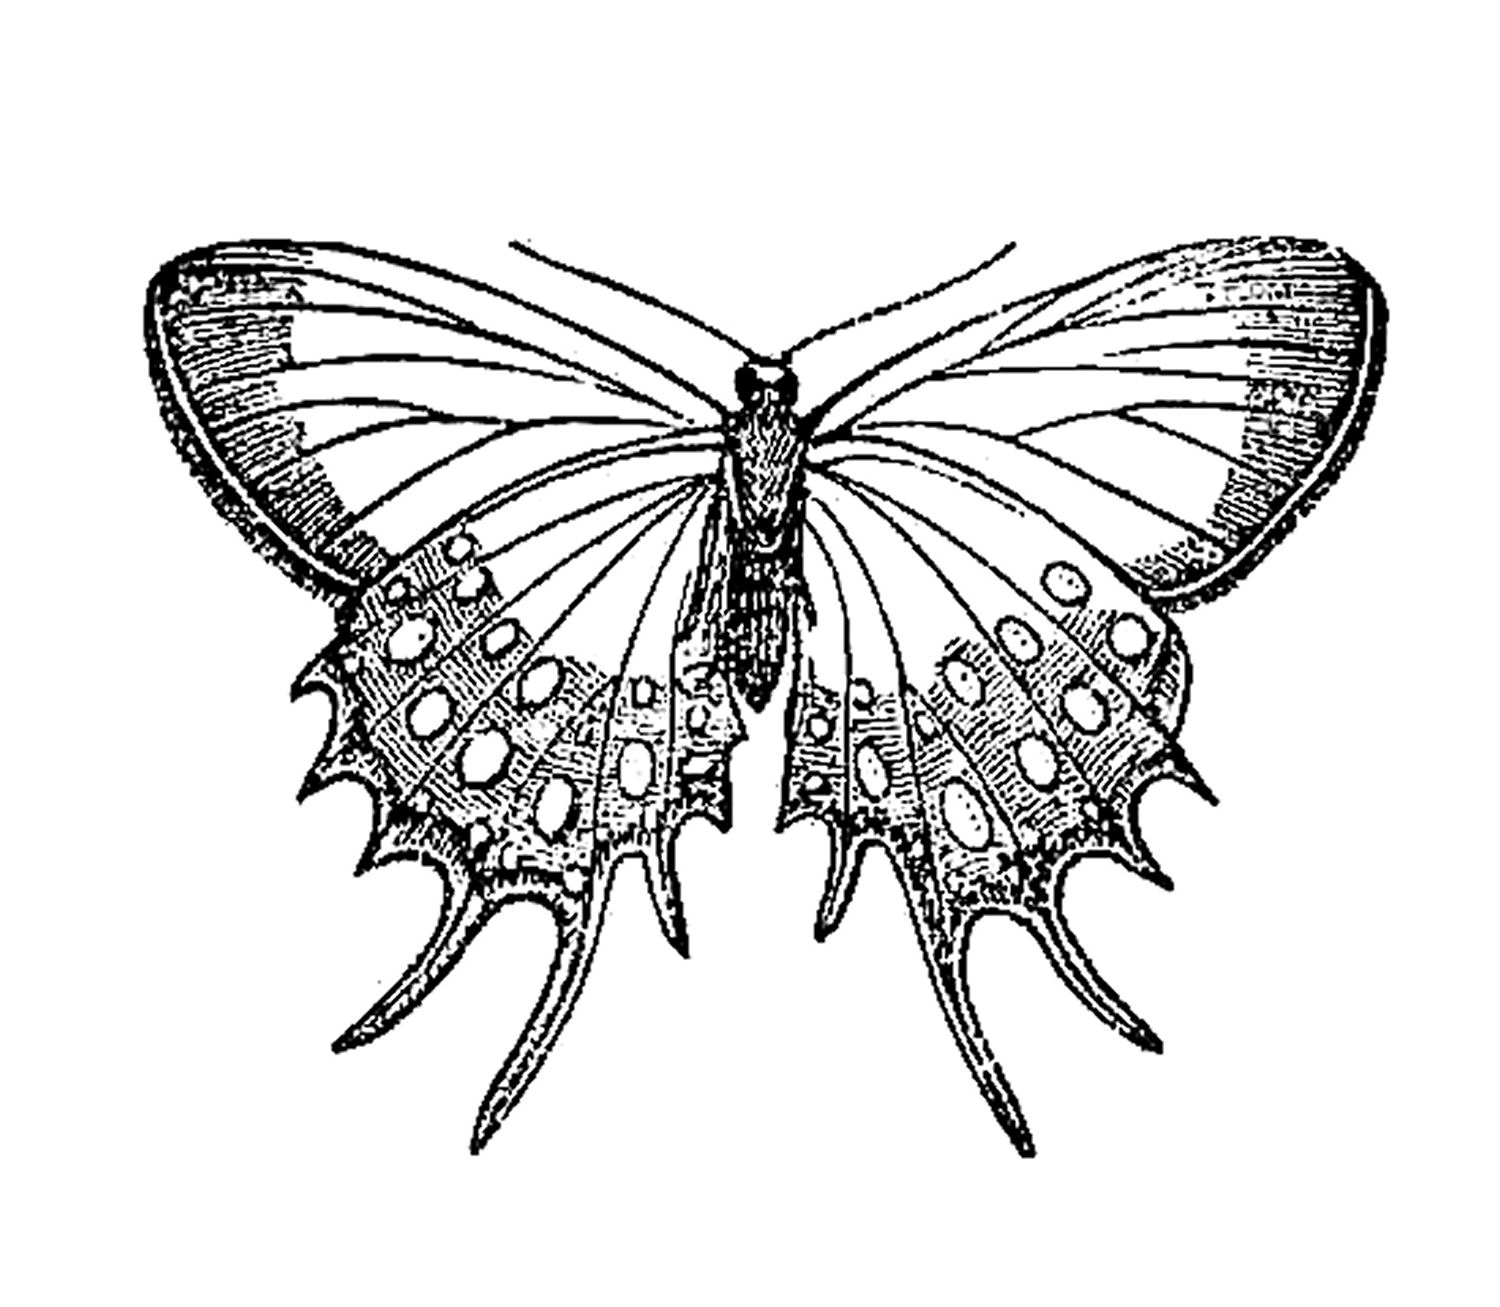 Antique Images: Vintage Insect Clip Art: Butterfly Graphic Design 